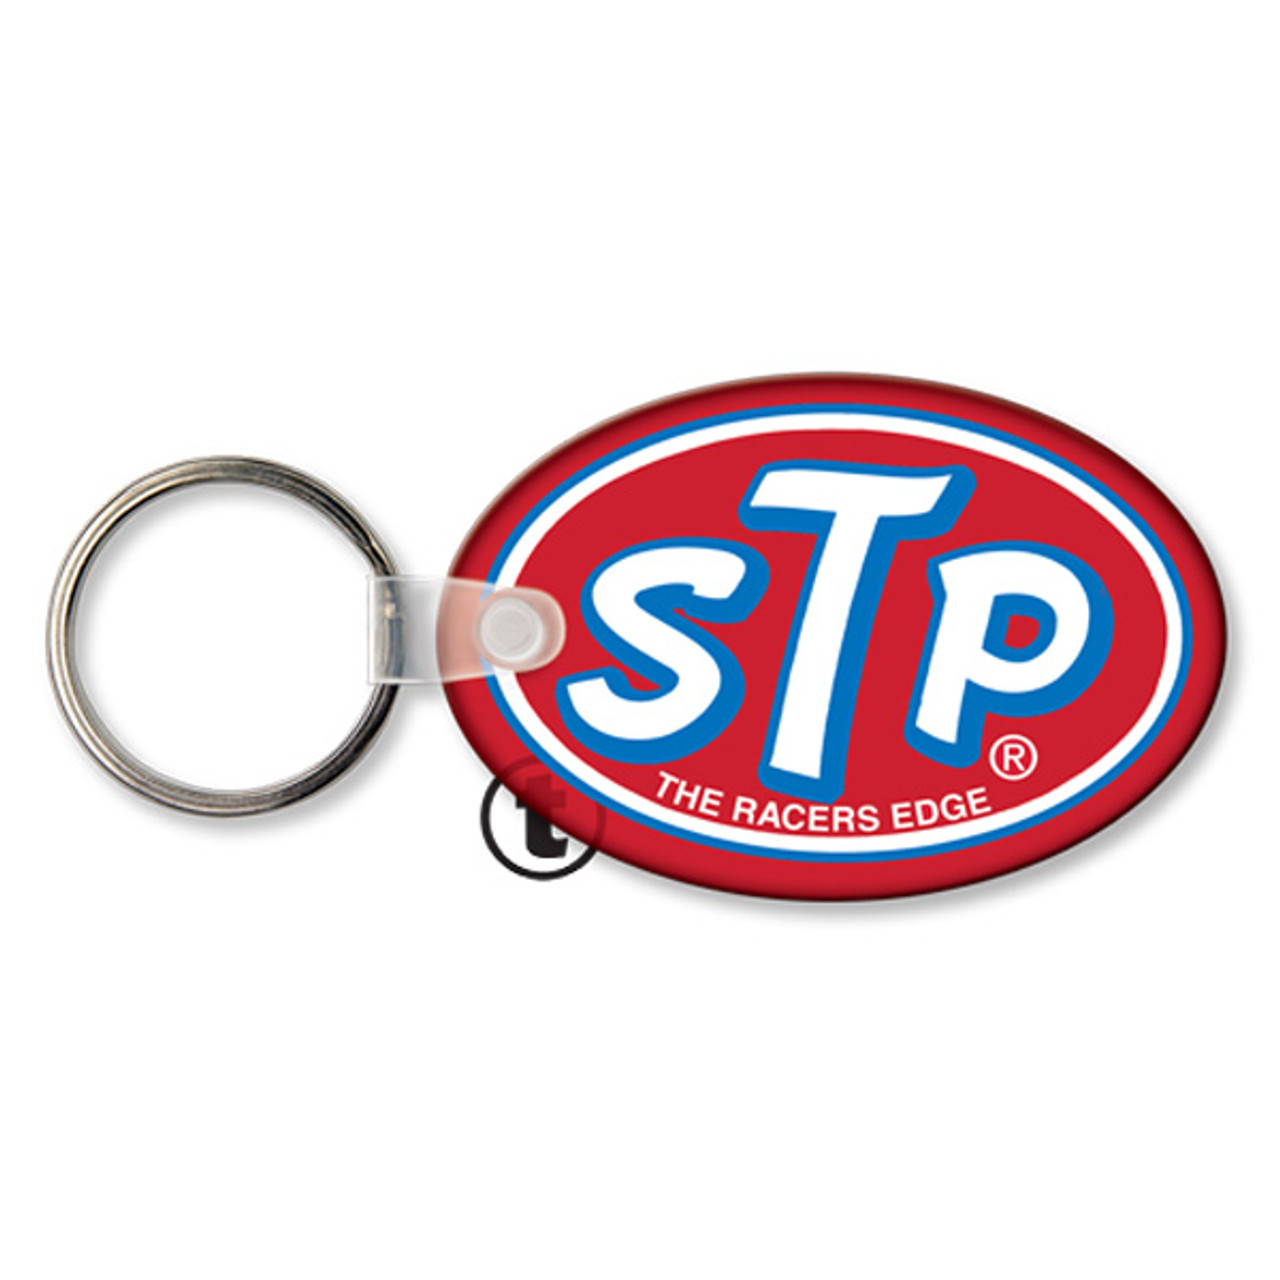 Shop for and Buy Custom Printed Soft Touch Vinyl Key Ring - Large Round at  . Large selection and bulk discounts available.